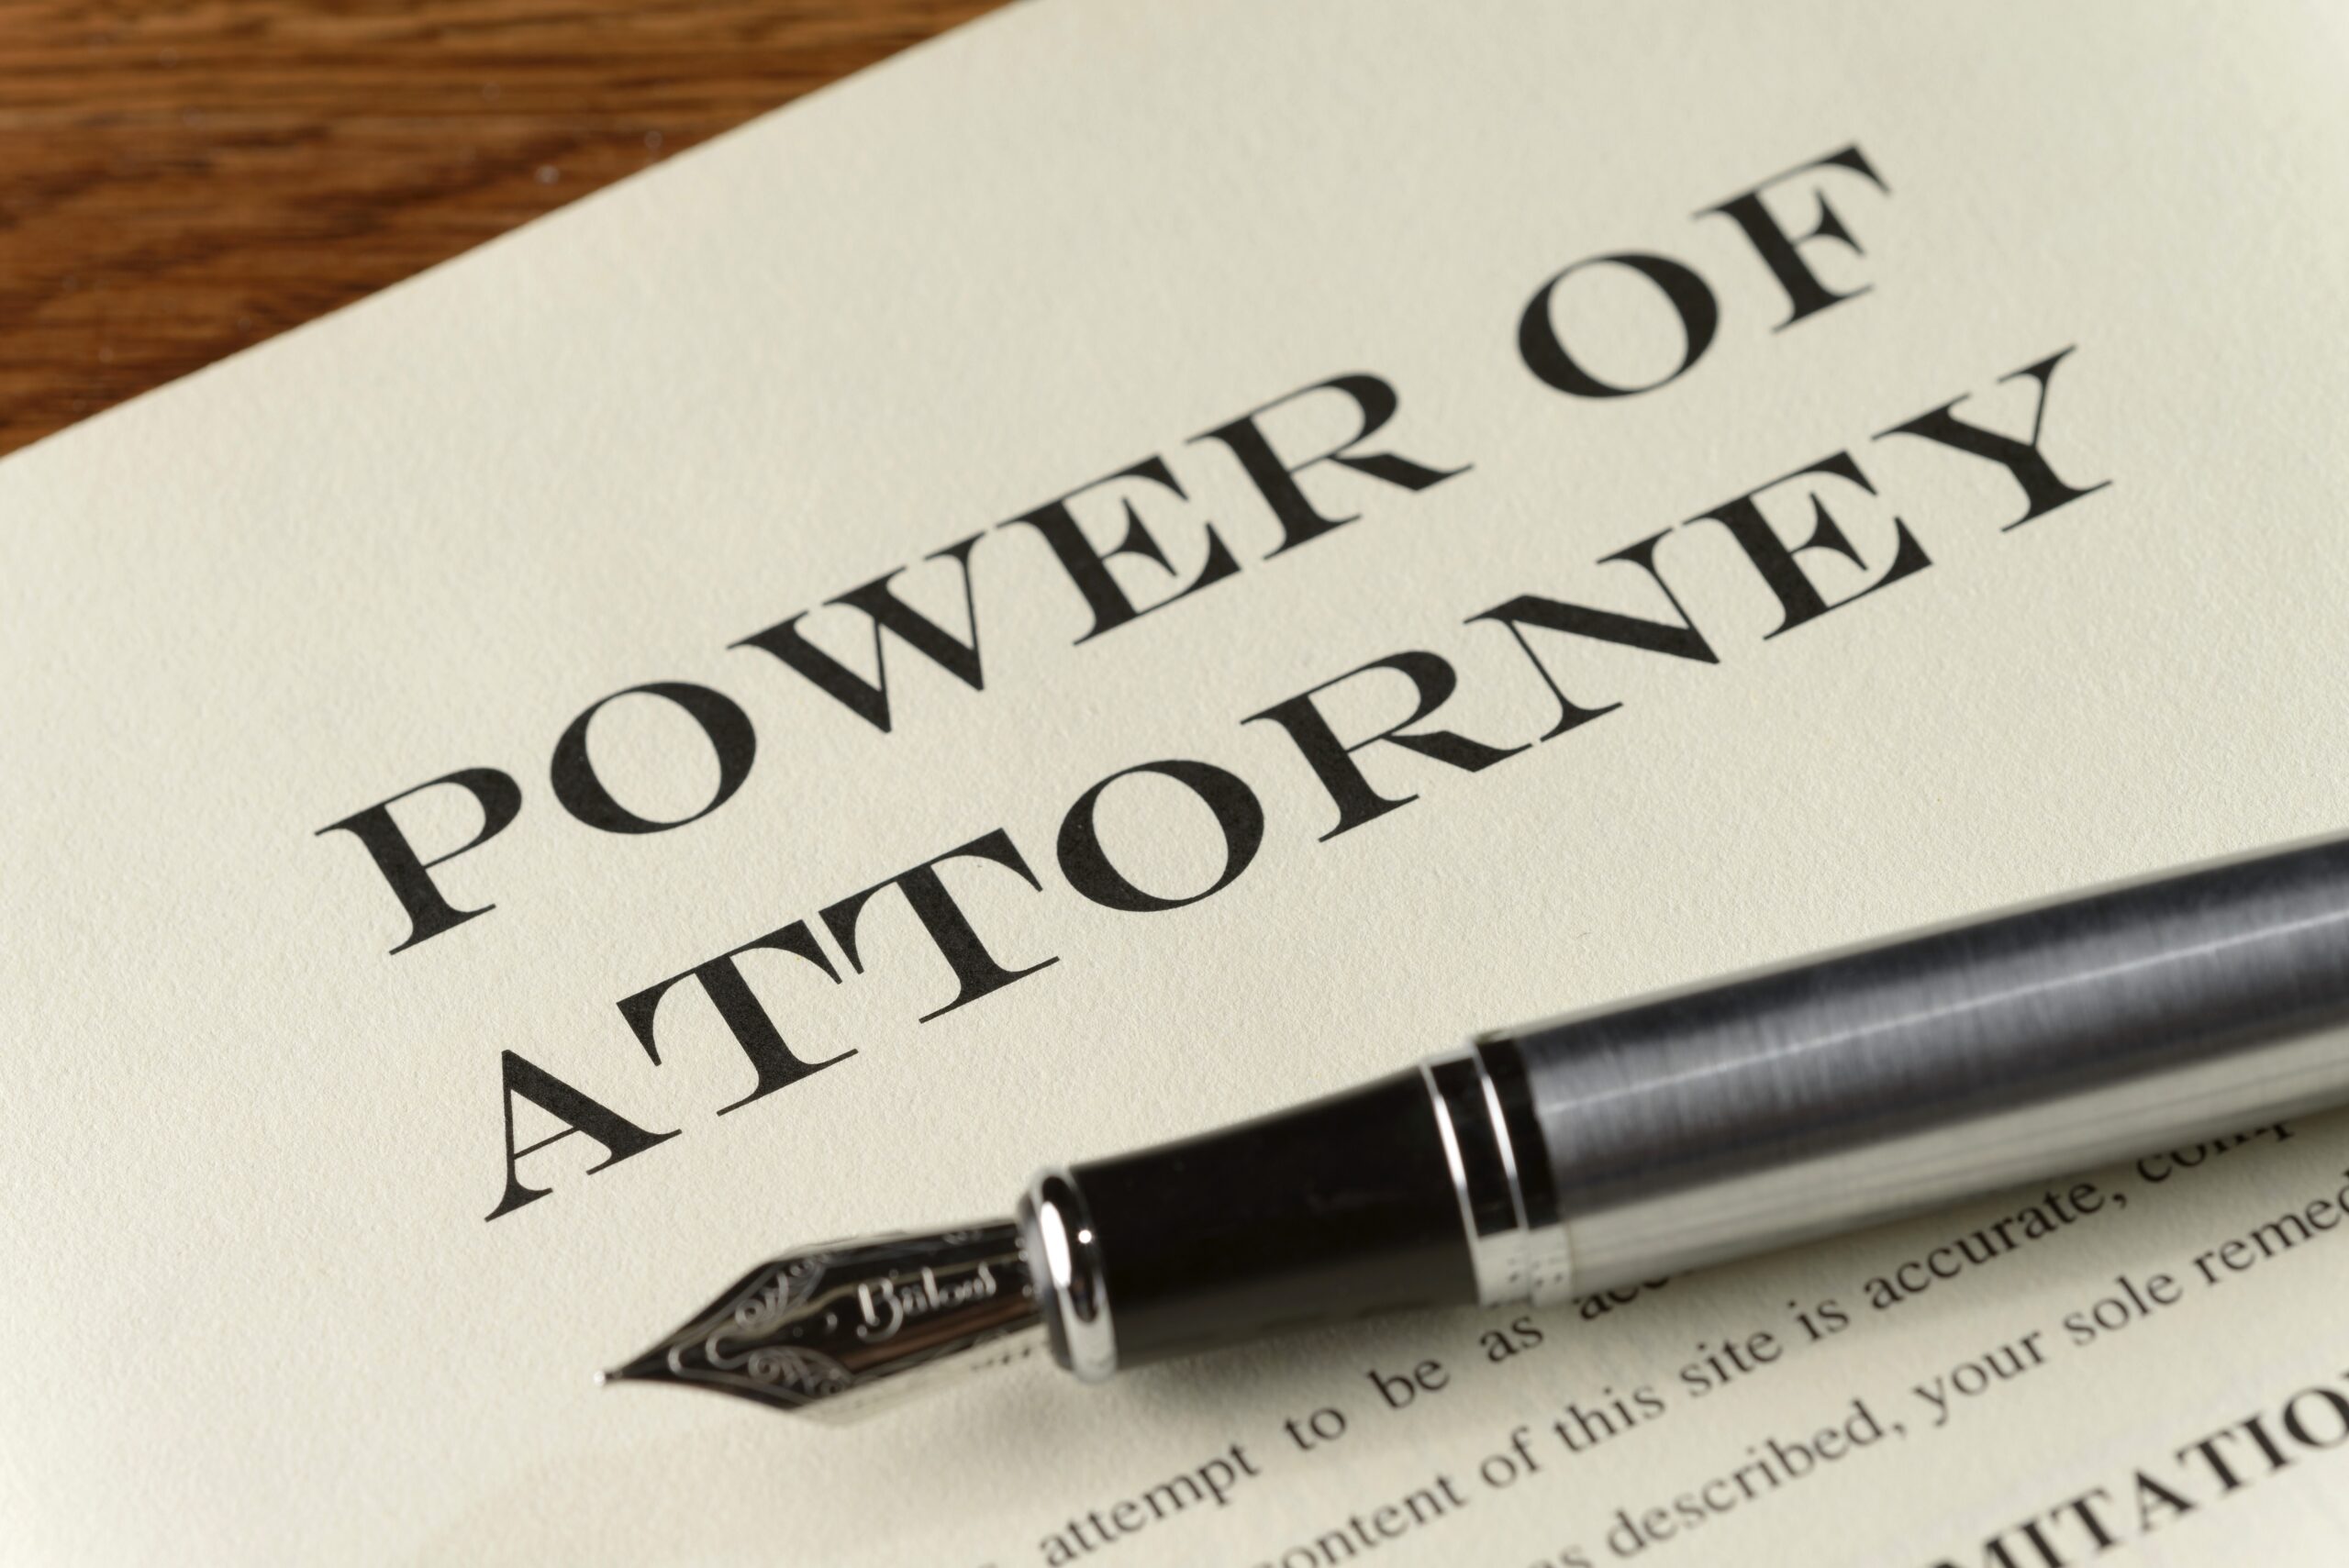 What Does Power of Attorney Mean?